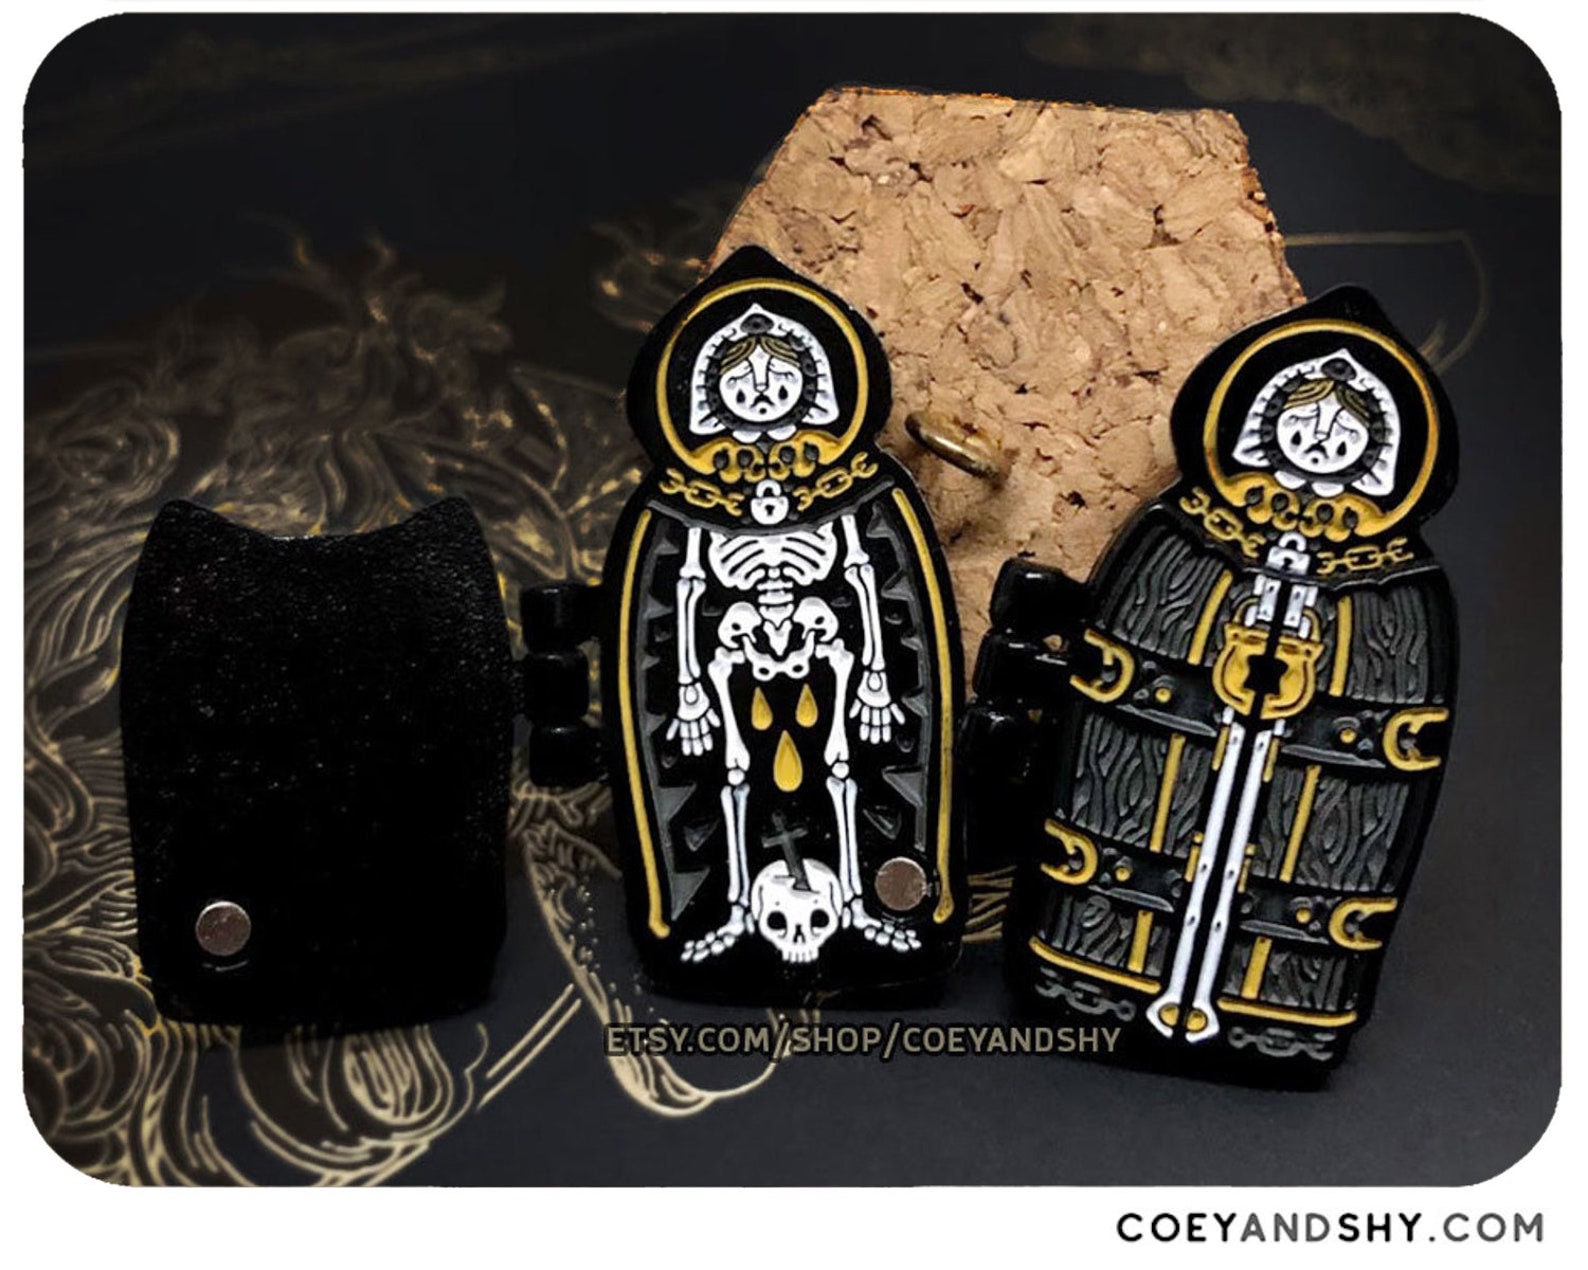 Shy & Coey: Shadow Box Occult Insects pins 